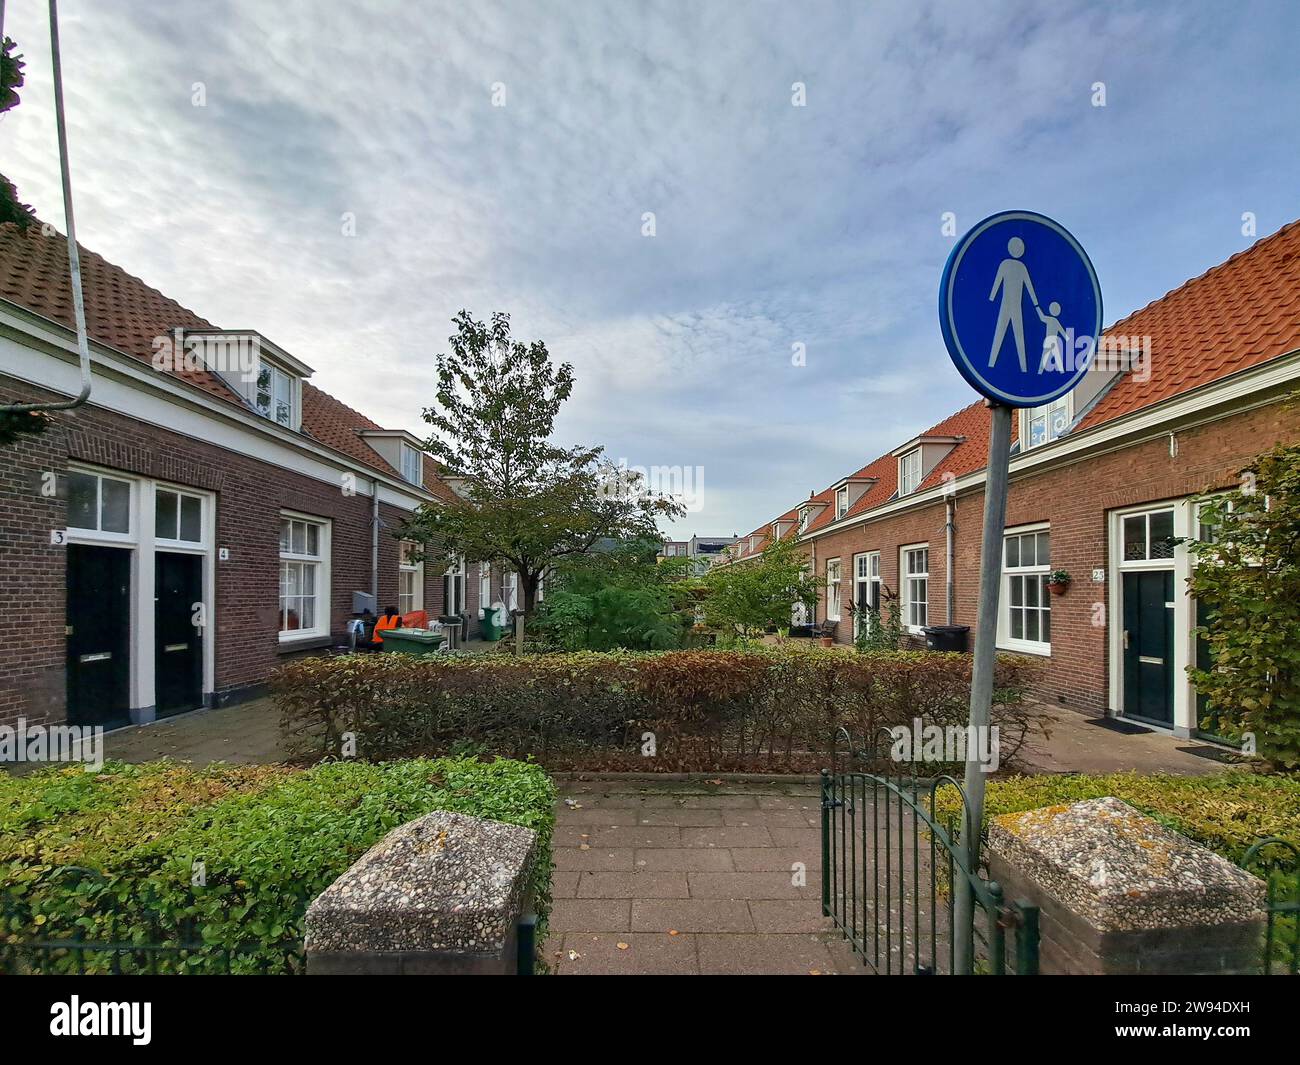 120 deaconess houses in the form of a courtyard on the Om en Bij in The Hague in the Netherlands Stock Photo